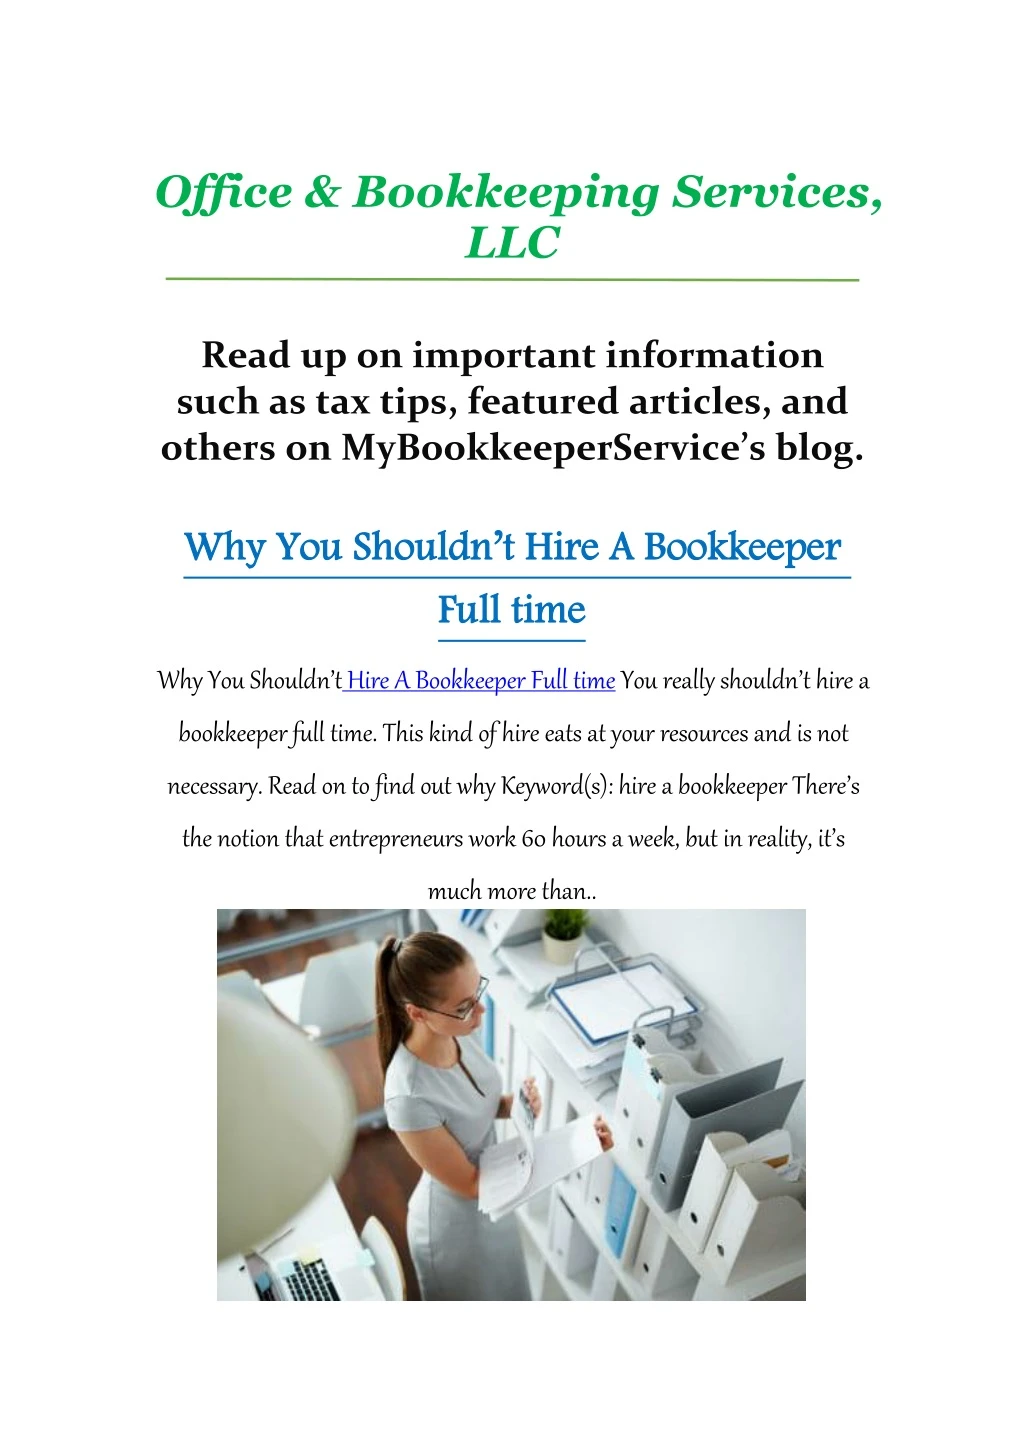 office bookkeeping services llc